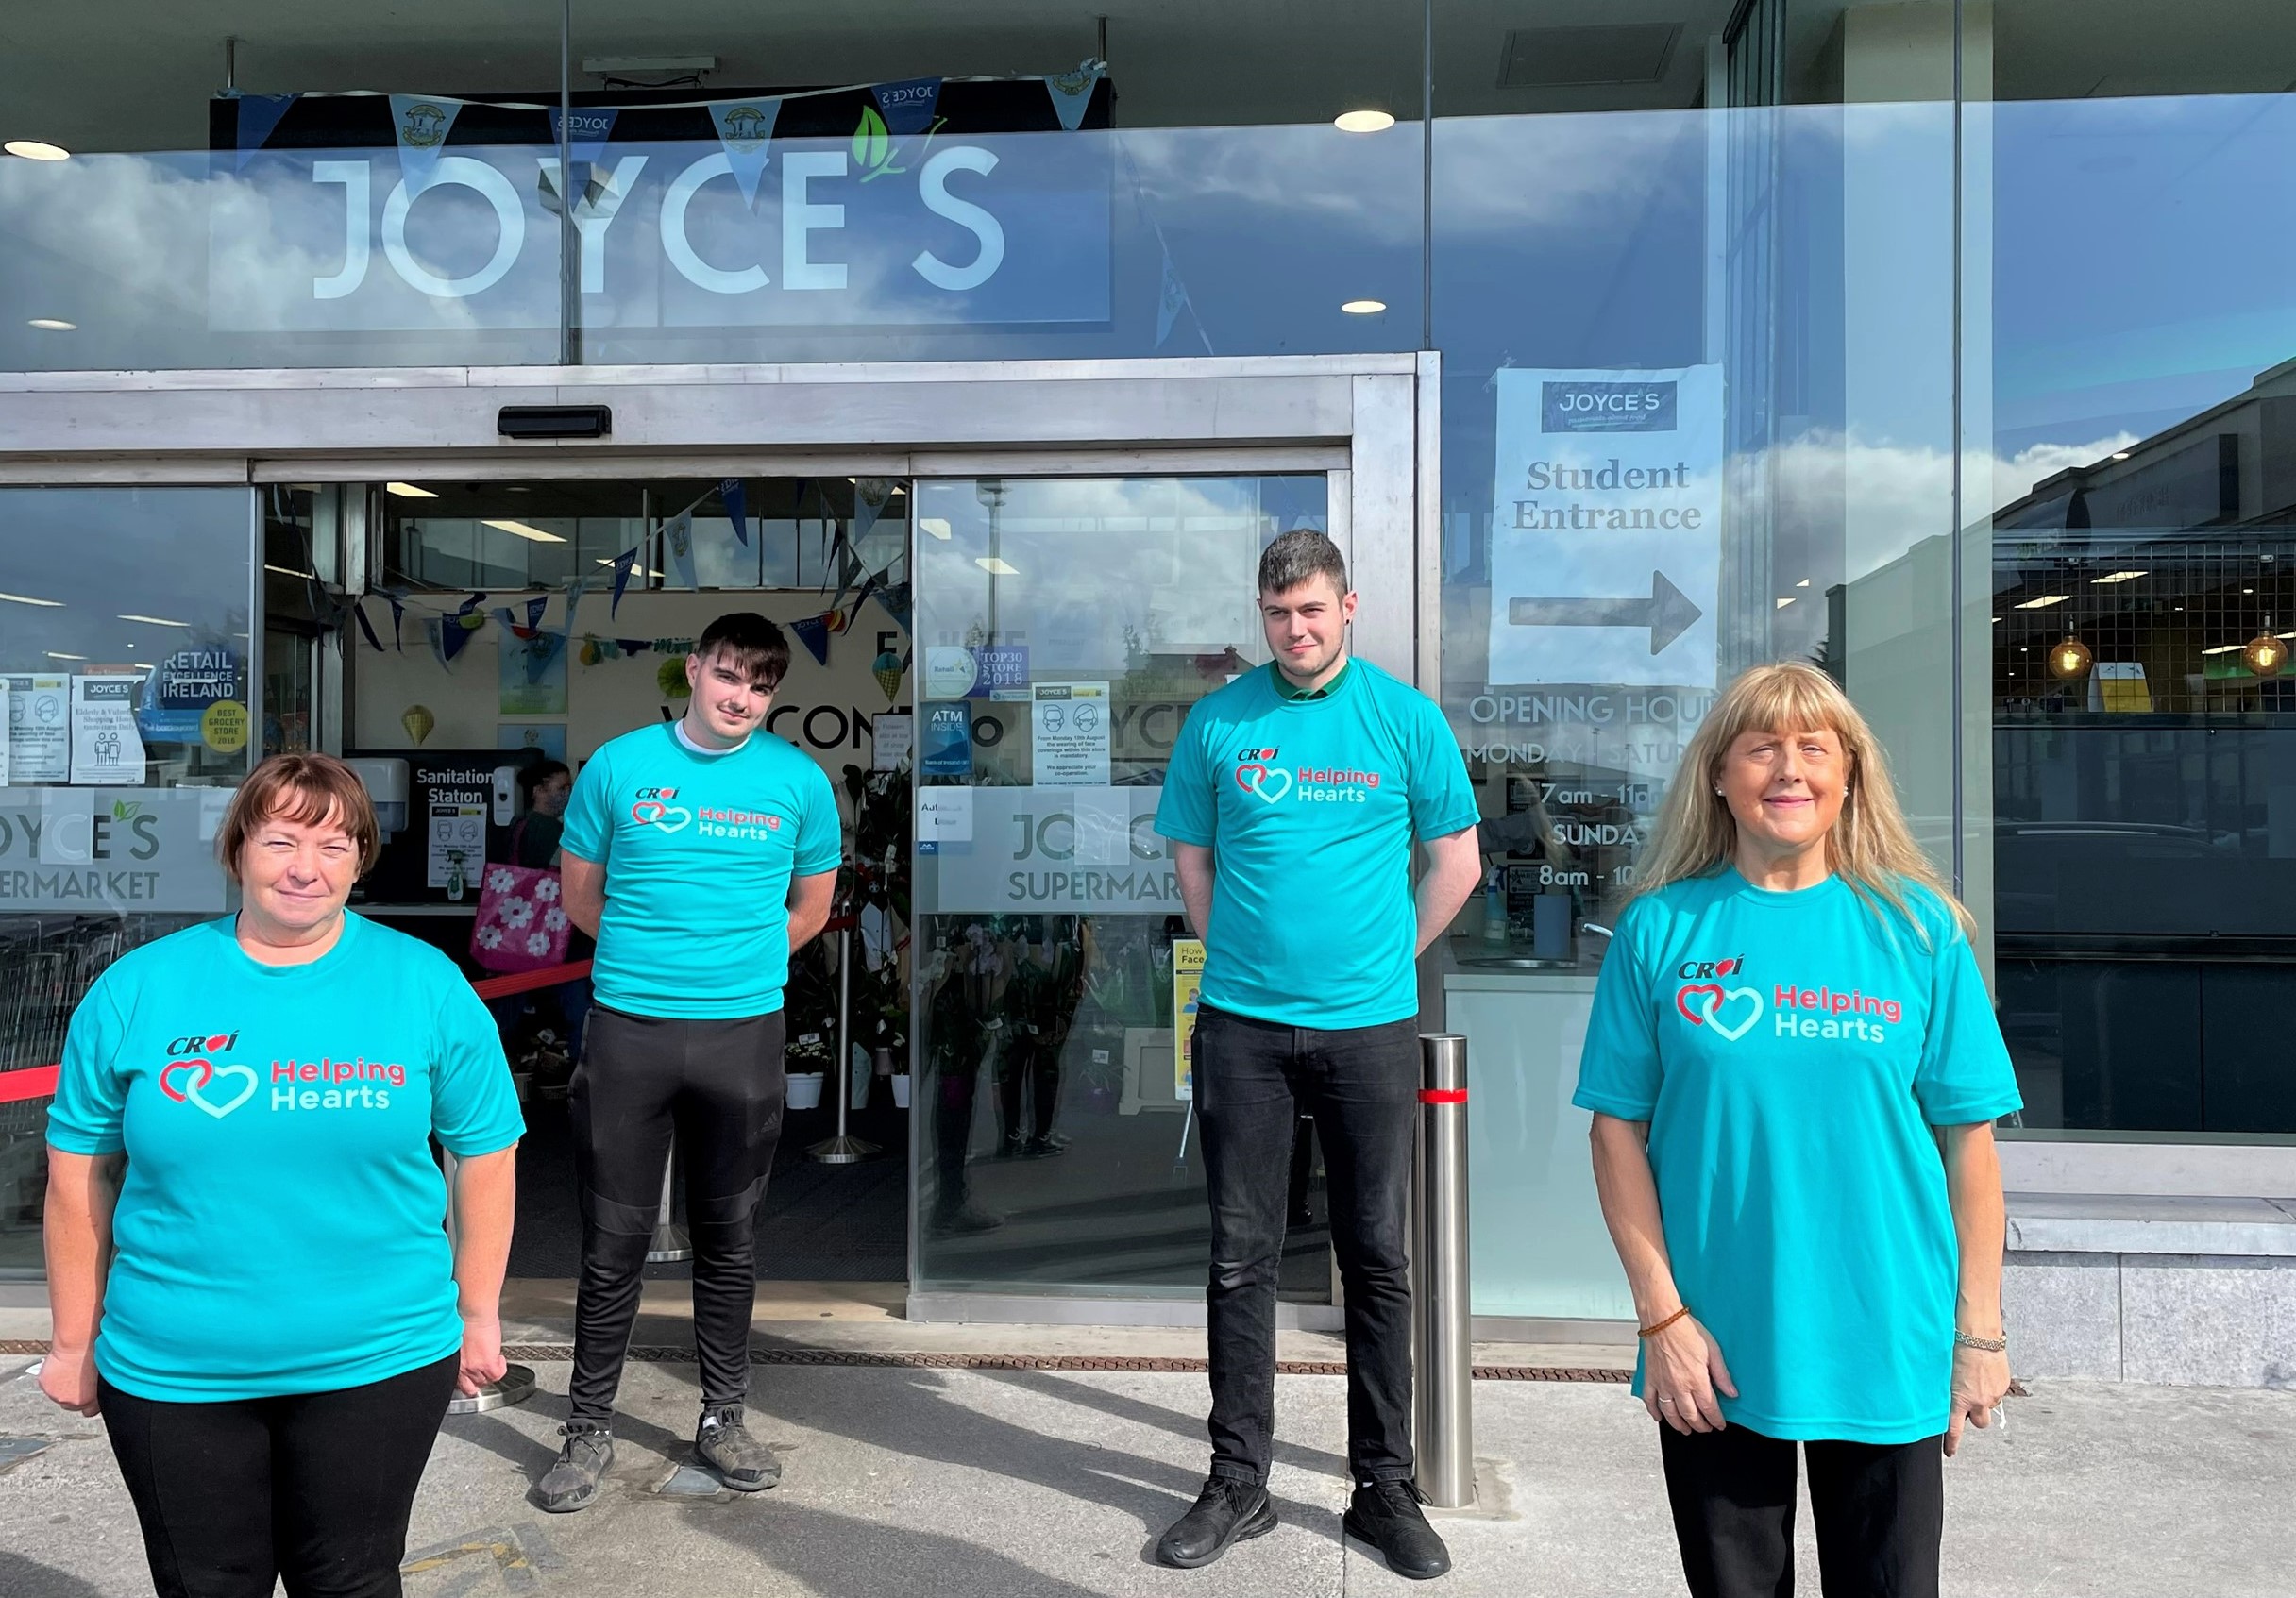 Joyce’s Supermarkets teams up with Croí to raise awareness about heart disease